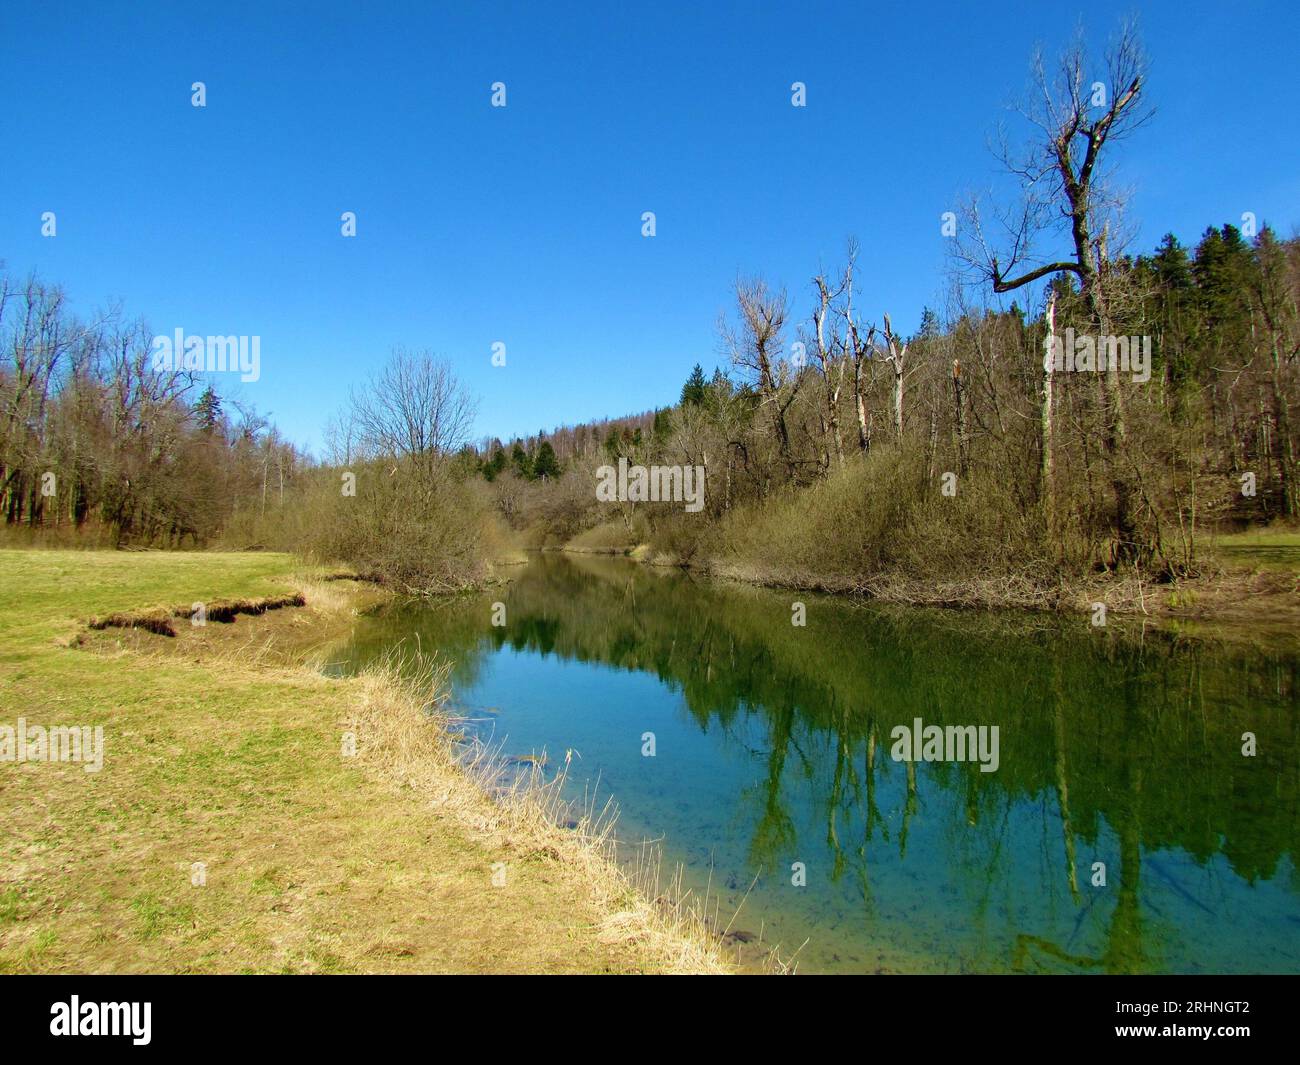 Scenic river Rak in Rakov Skocjan Notranjska, Slovenia with a meadow on one side and a forest on the other and a reflection of the trees in the river Stock Photo